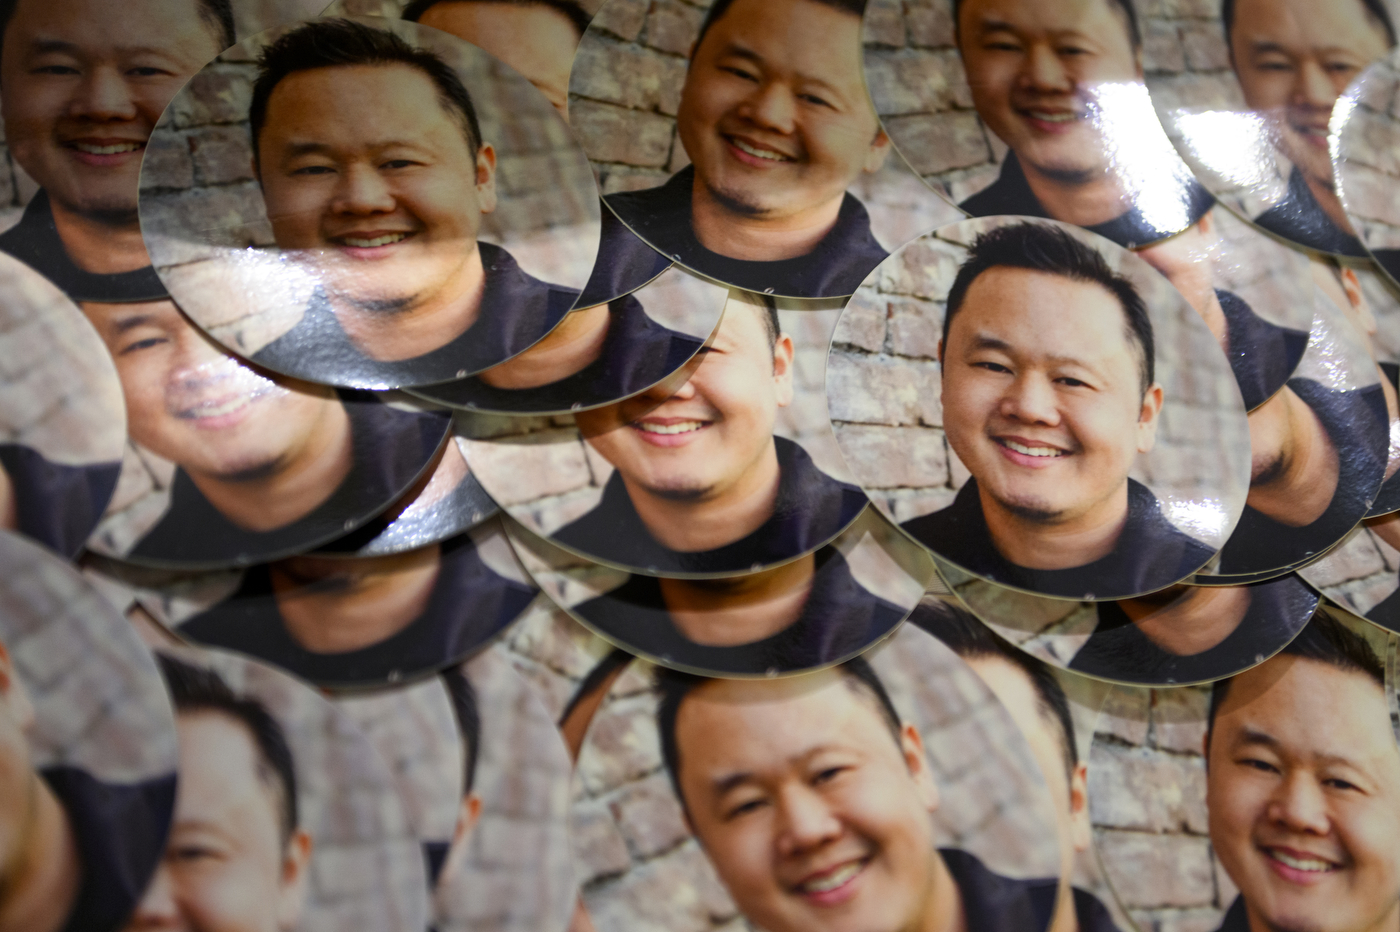 cutout posters of chef tila's head